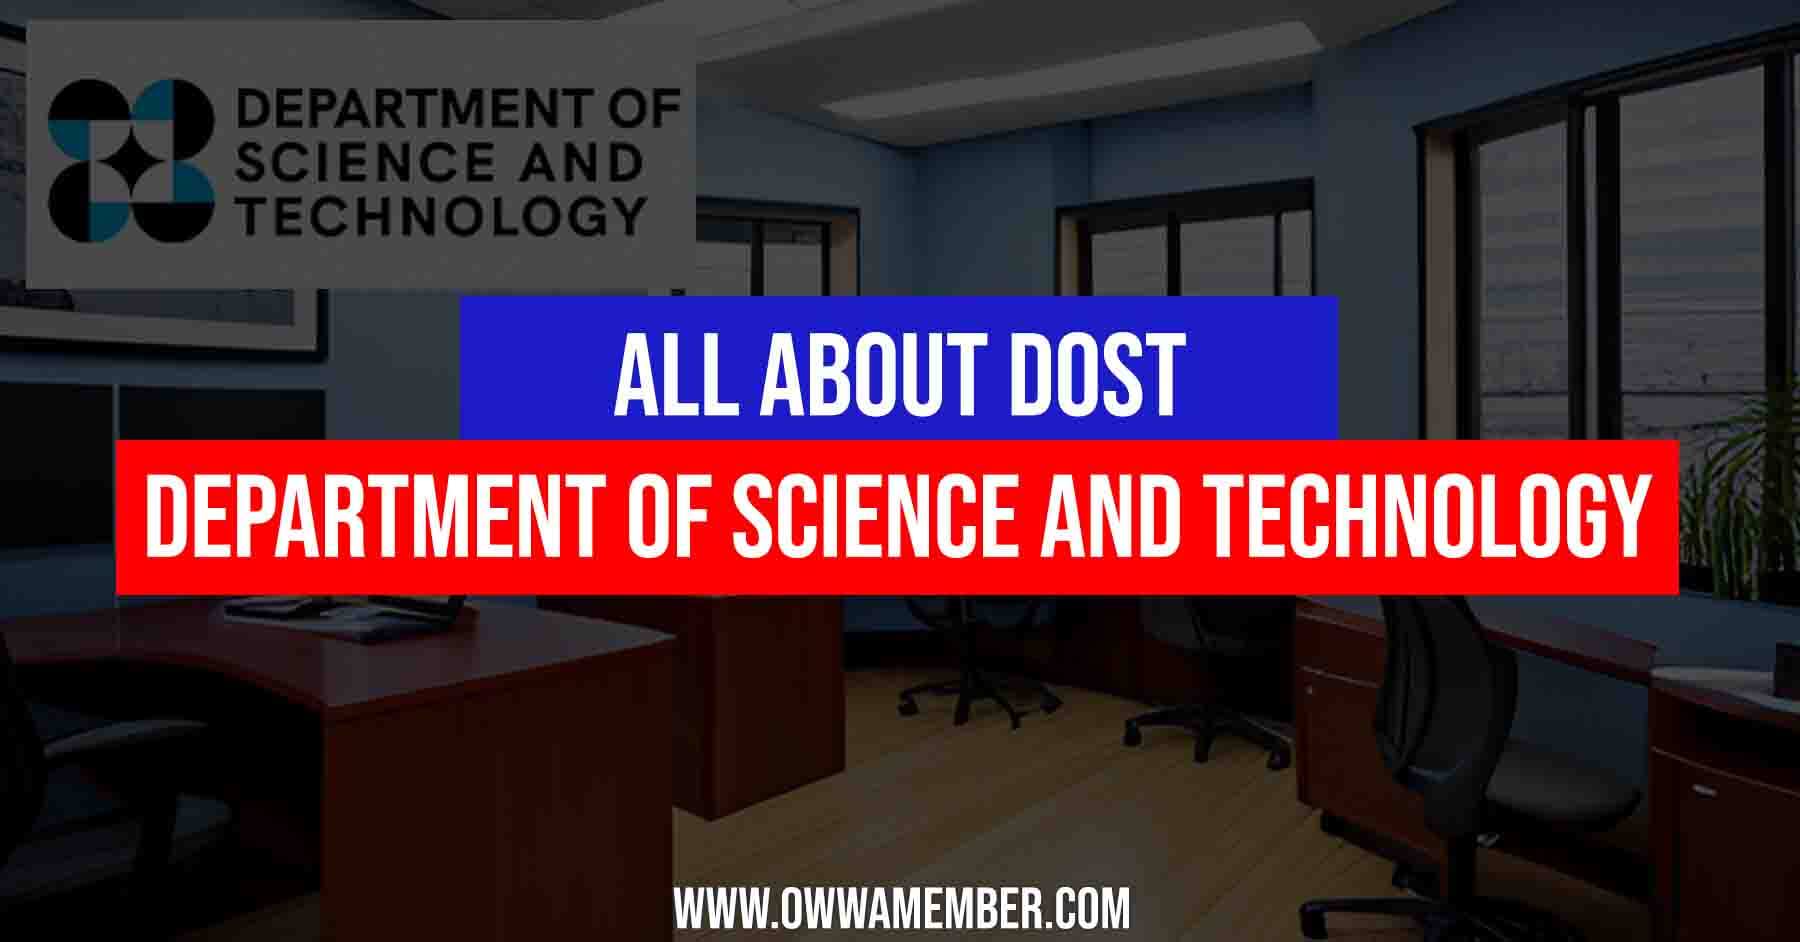 dost department of science and technology philippines